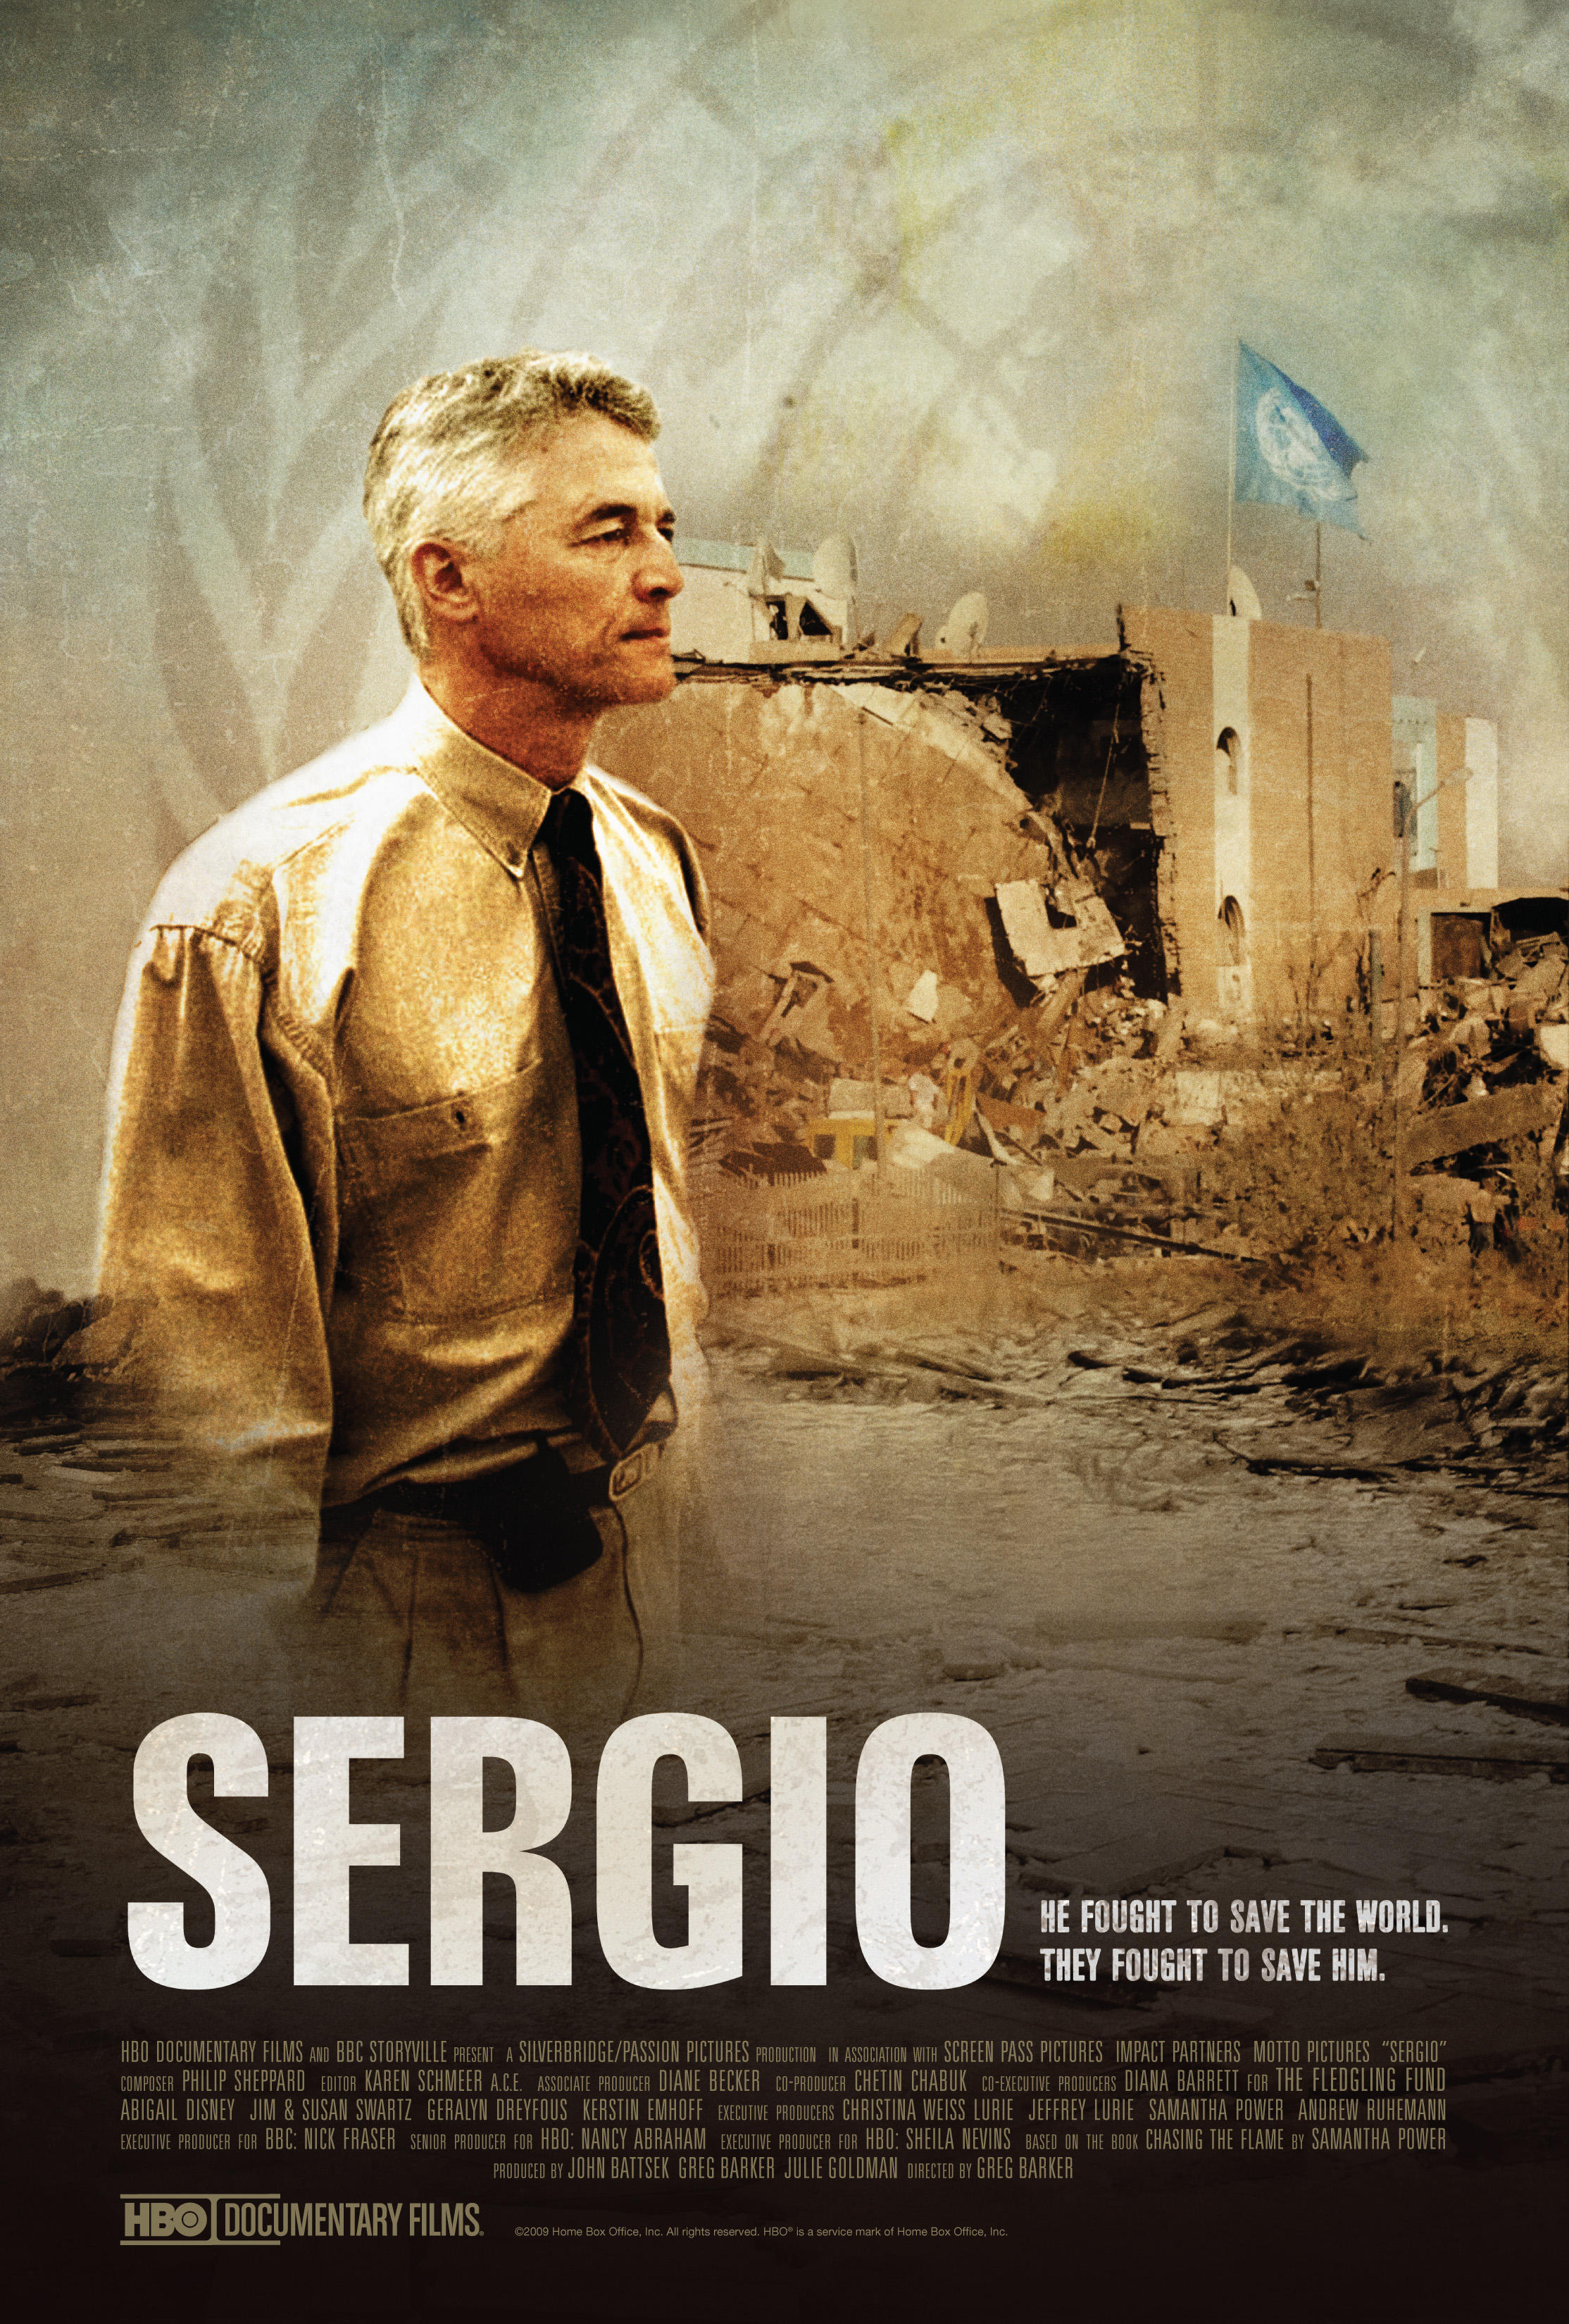 SERGIO - Directed by Greg Barker - HBO